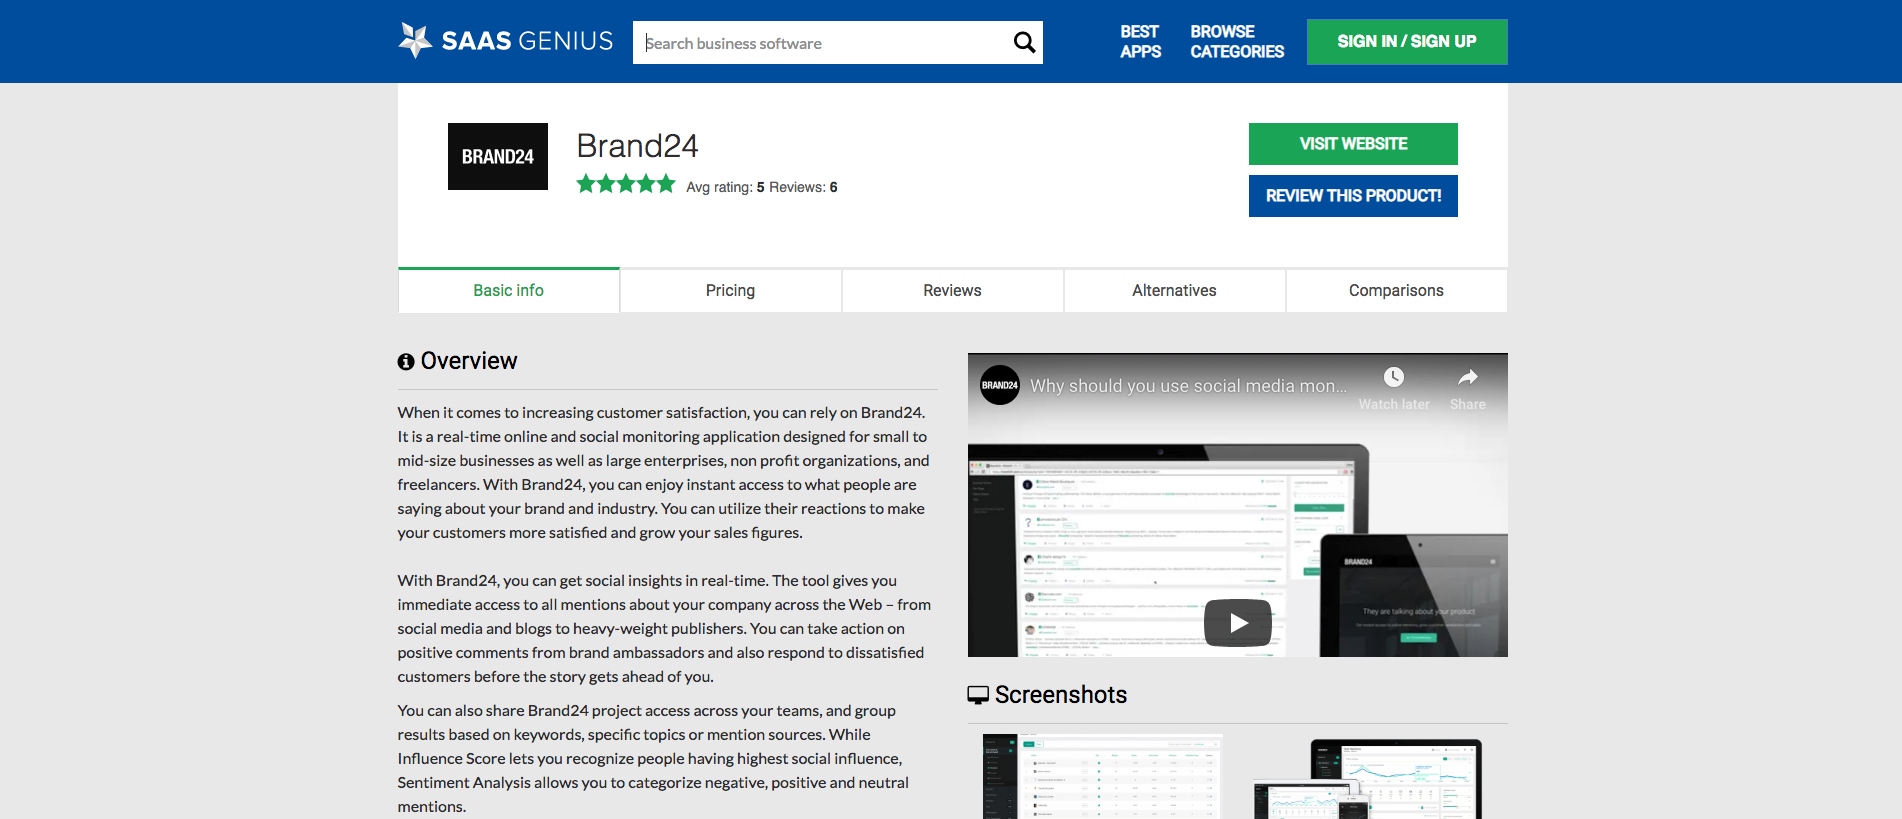 Screenshot of the SaaSGenius interface showcasing the Brand24 review page.